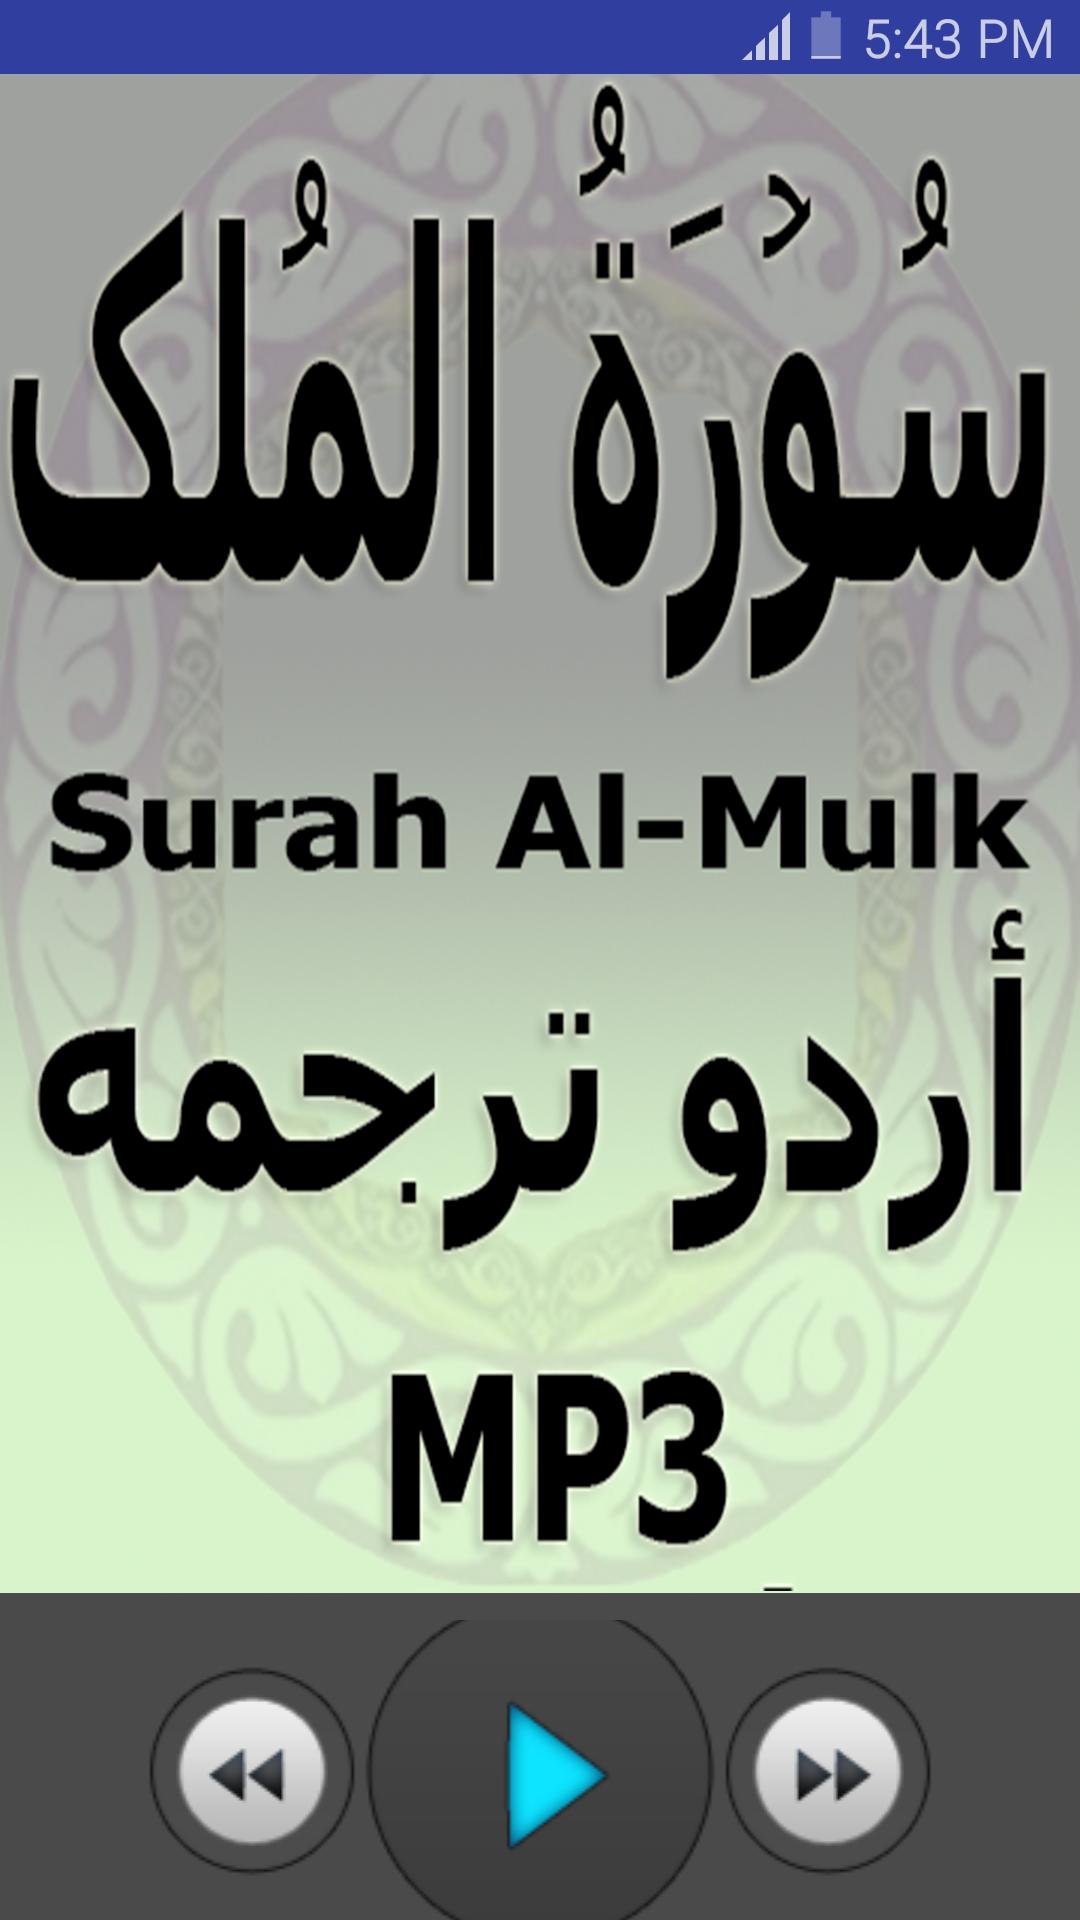 Surah Mulk Mp3 Free Audio with Urdu Translation for Android - APK Download